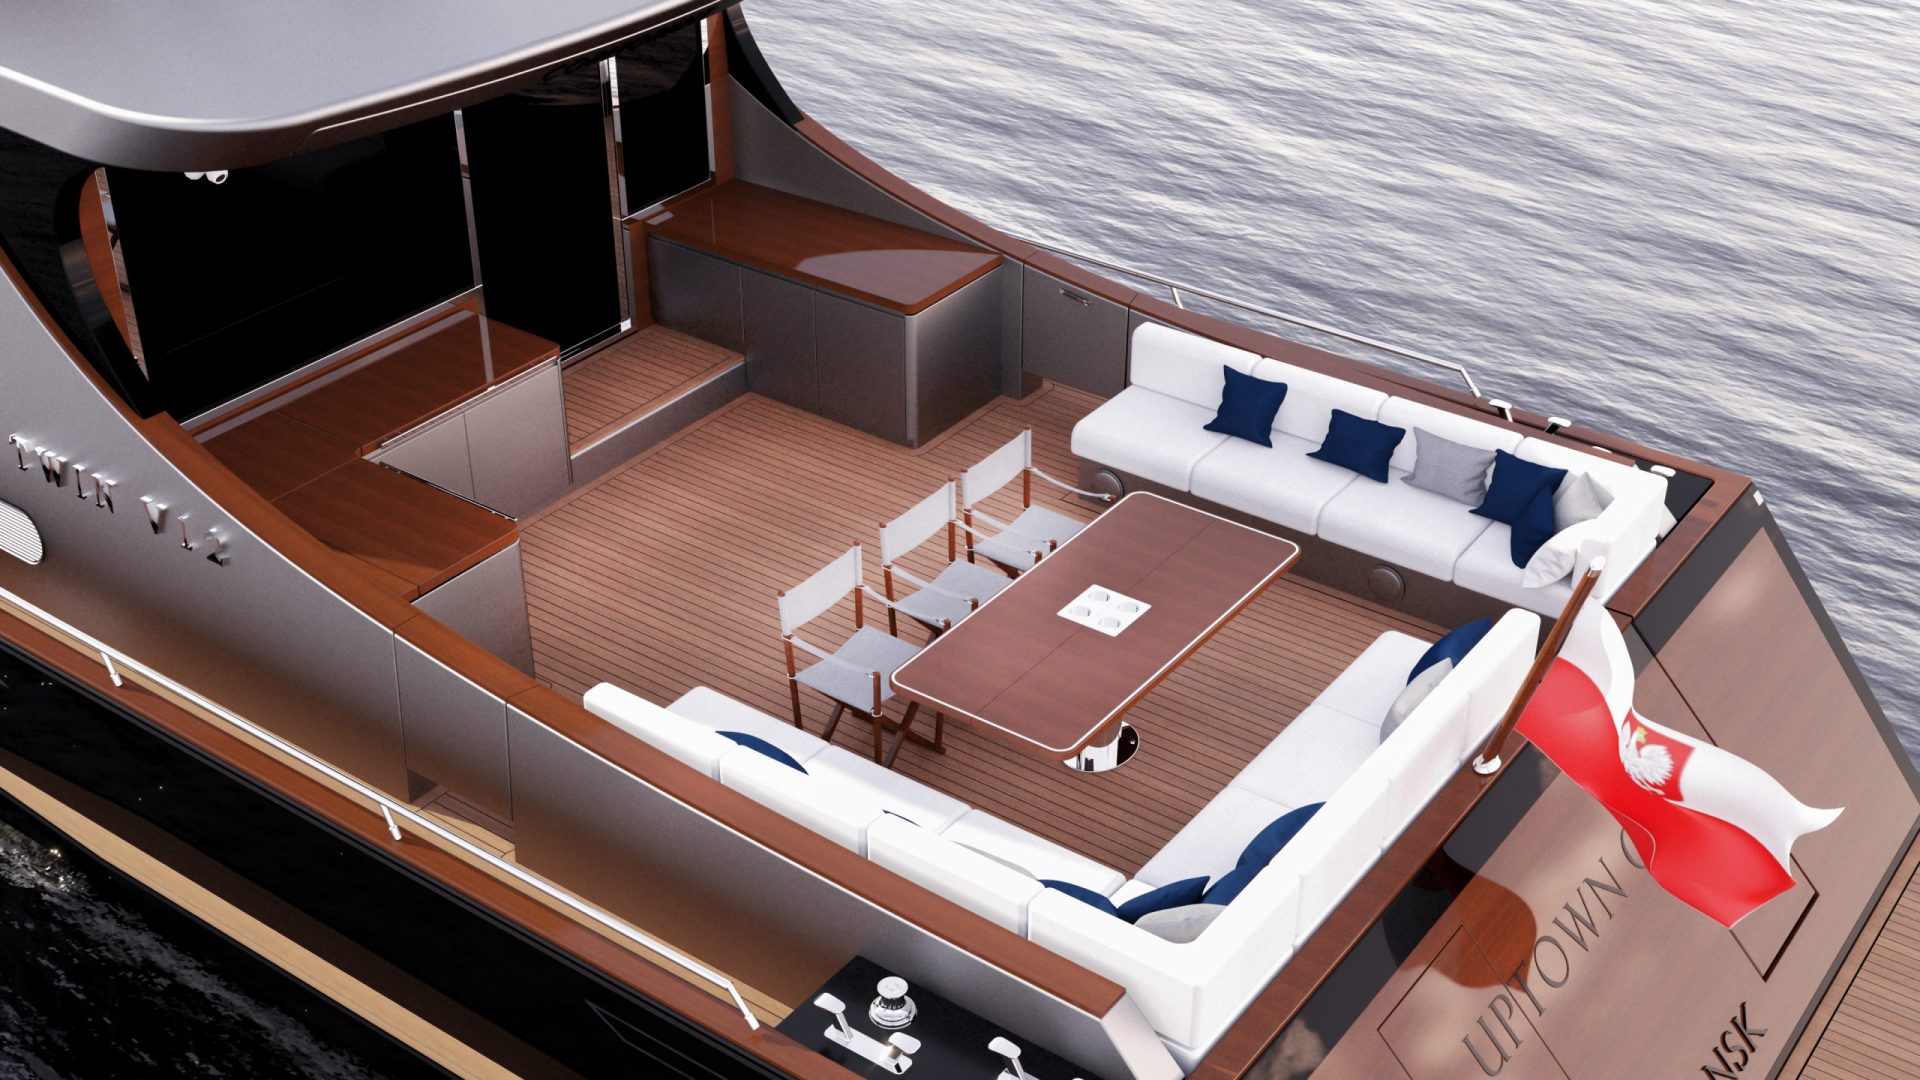 Classic motor yacht like Brand Banks, Palm Beach, Vicem but with modern design